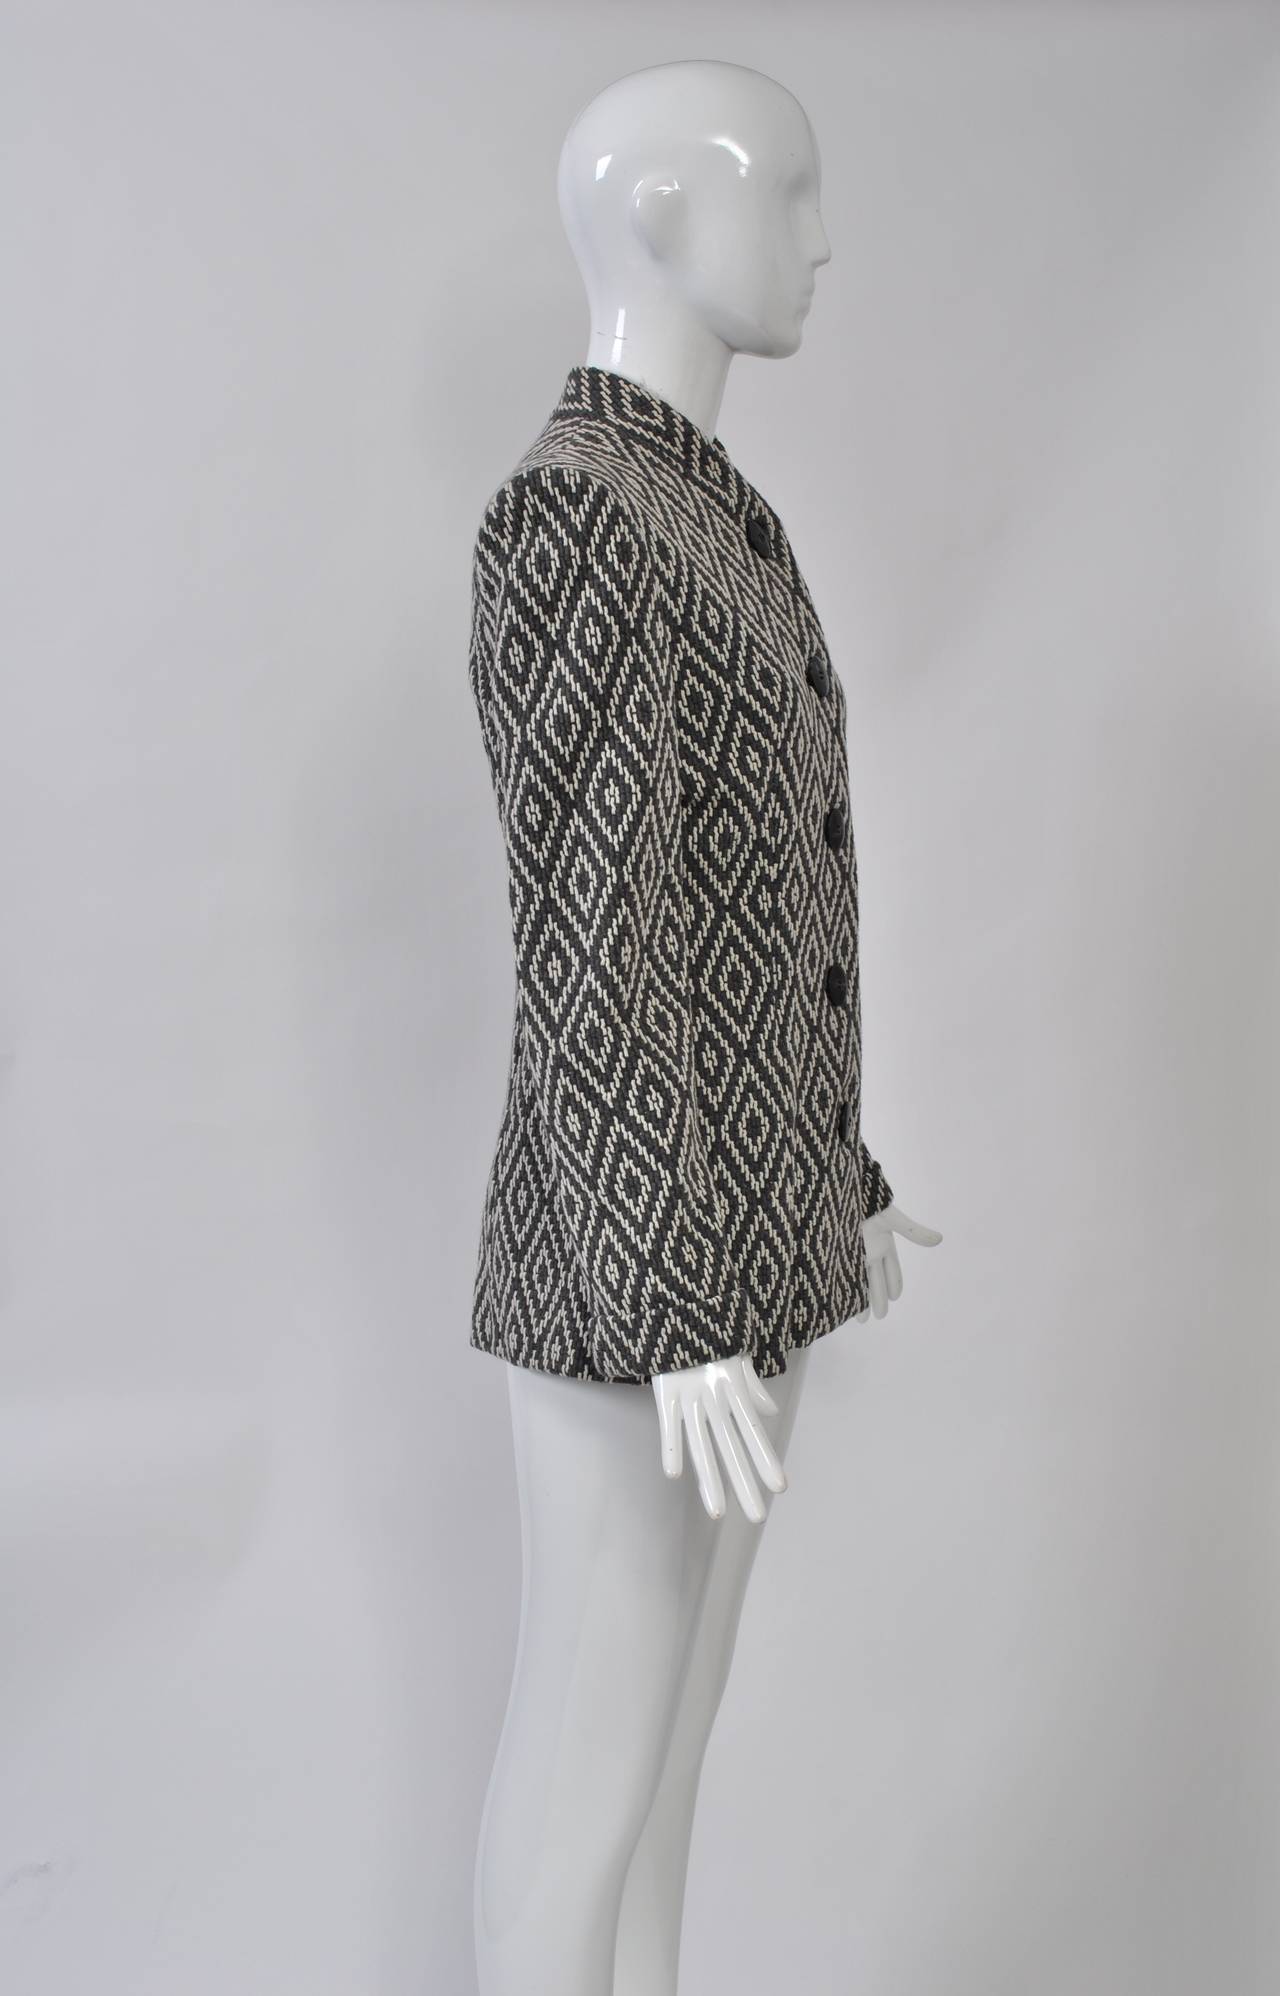 Trigère's clothing was always simply elegant and tailored well. This jacket is no exception. Fashioned of gray and ivory knit in a diamond pattern, it features a collarless, funnel neckline, single-breasted and slightly shaped styling, and narrow